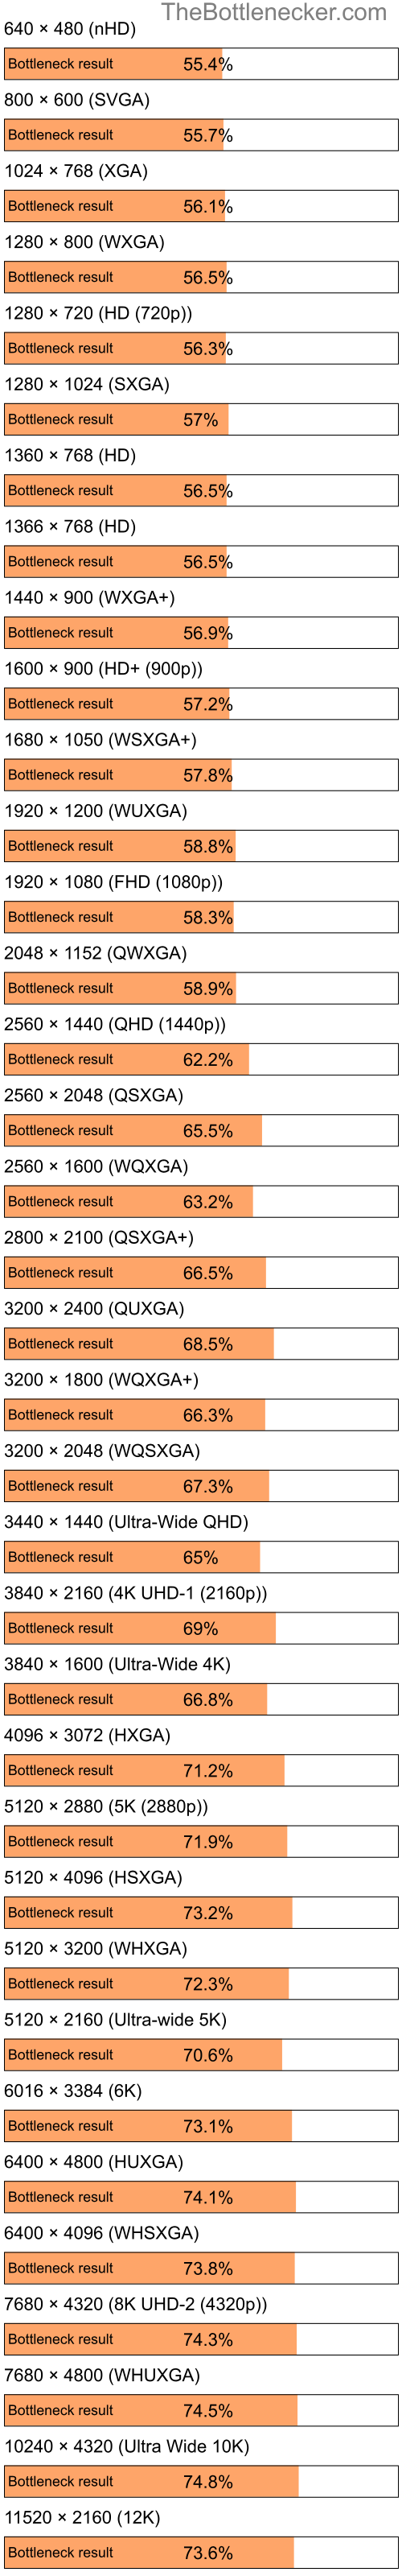 Bottleneck results by resolution for Intel Atom N280 and AMD Mobility Radeon HD 3430 in Processor Intense Tasks